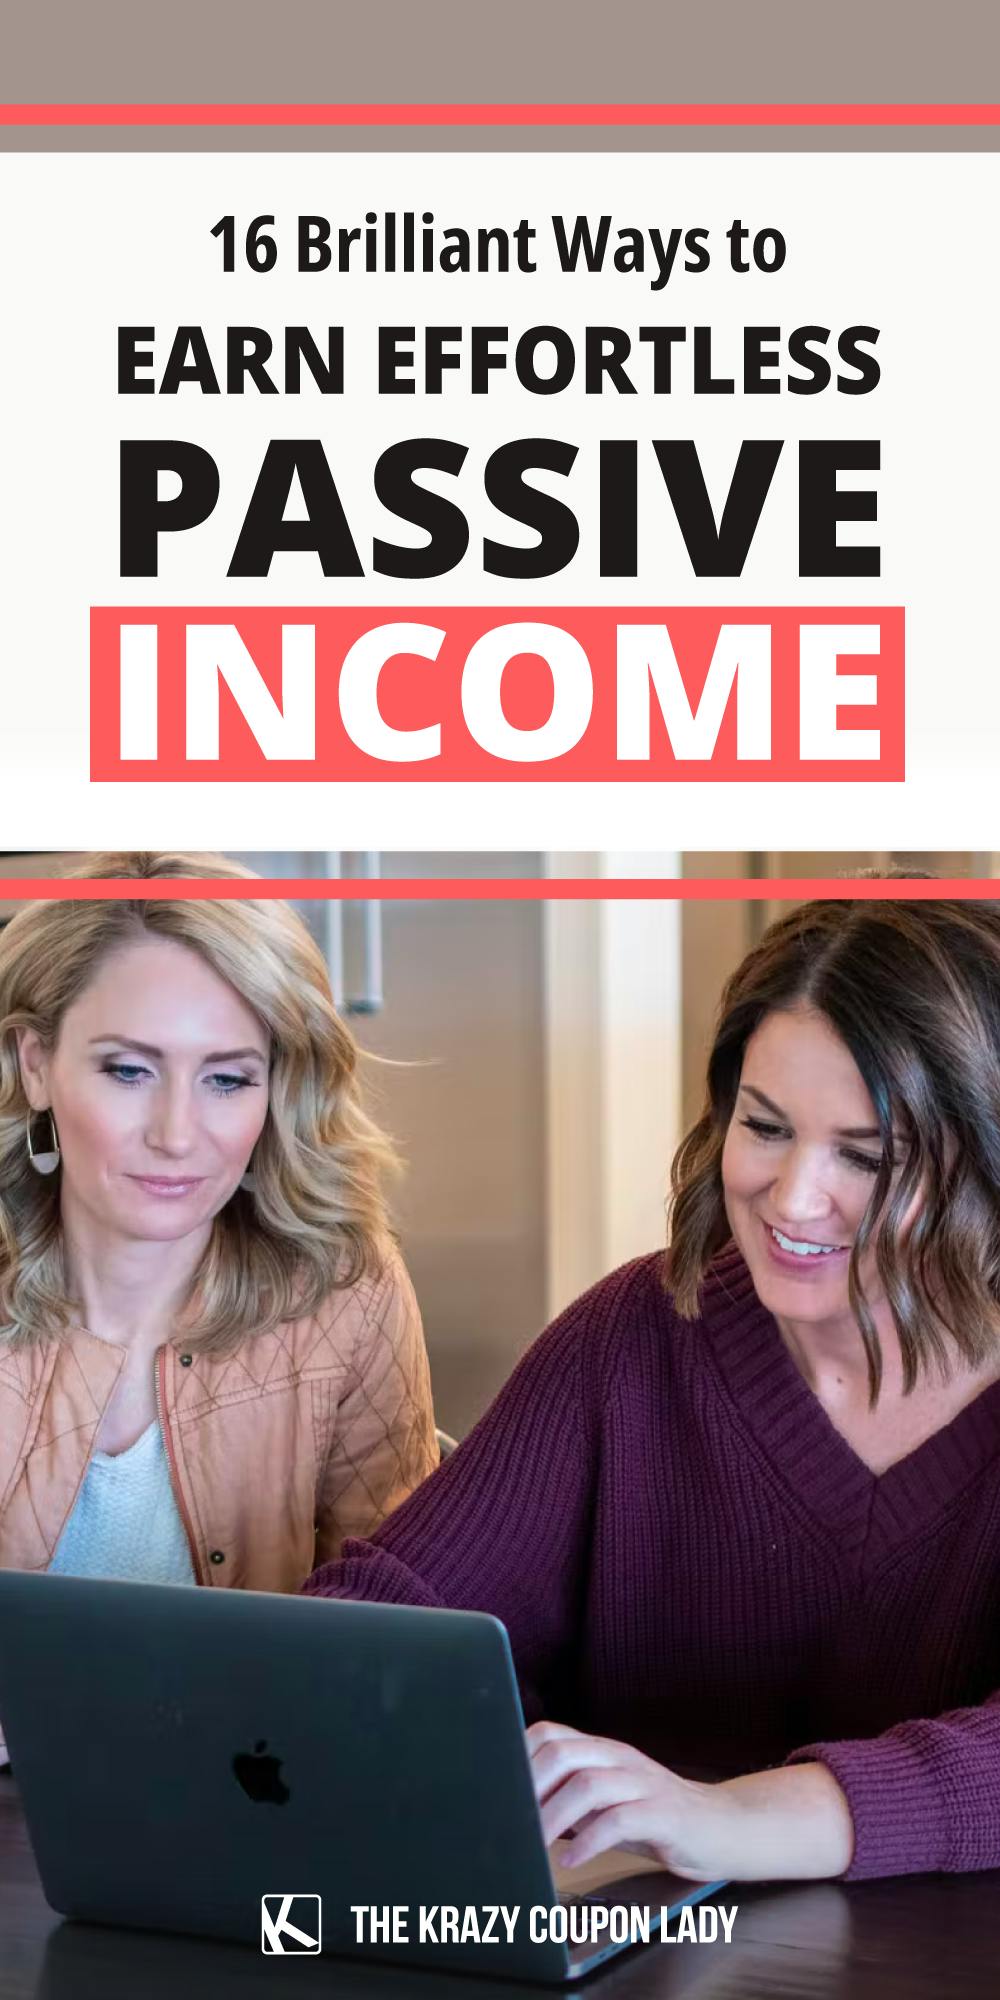 16 Brilliant Ways to Earn Effortless Passive Income